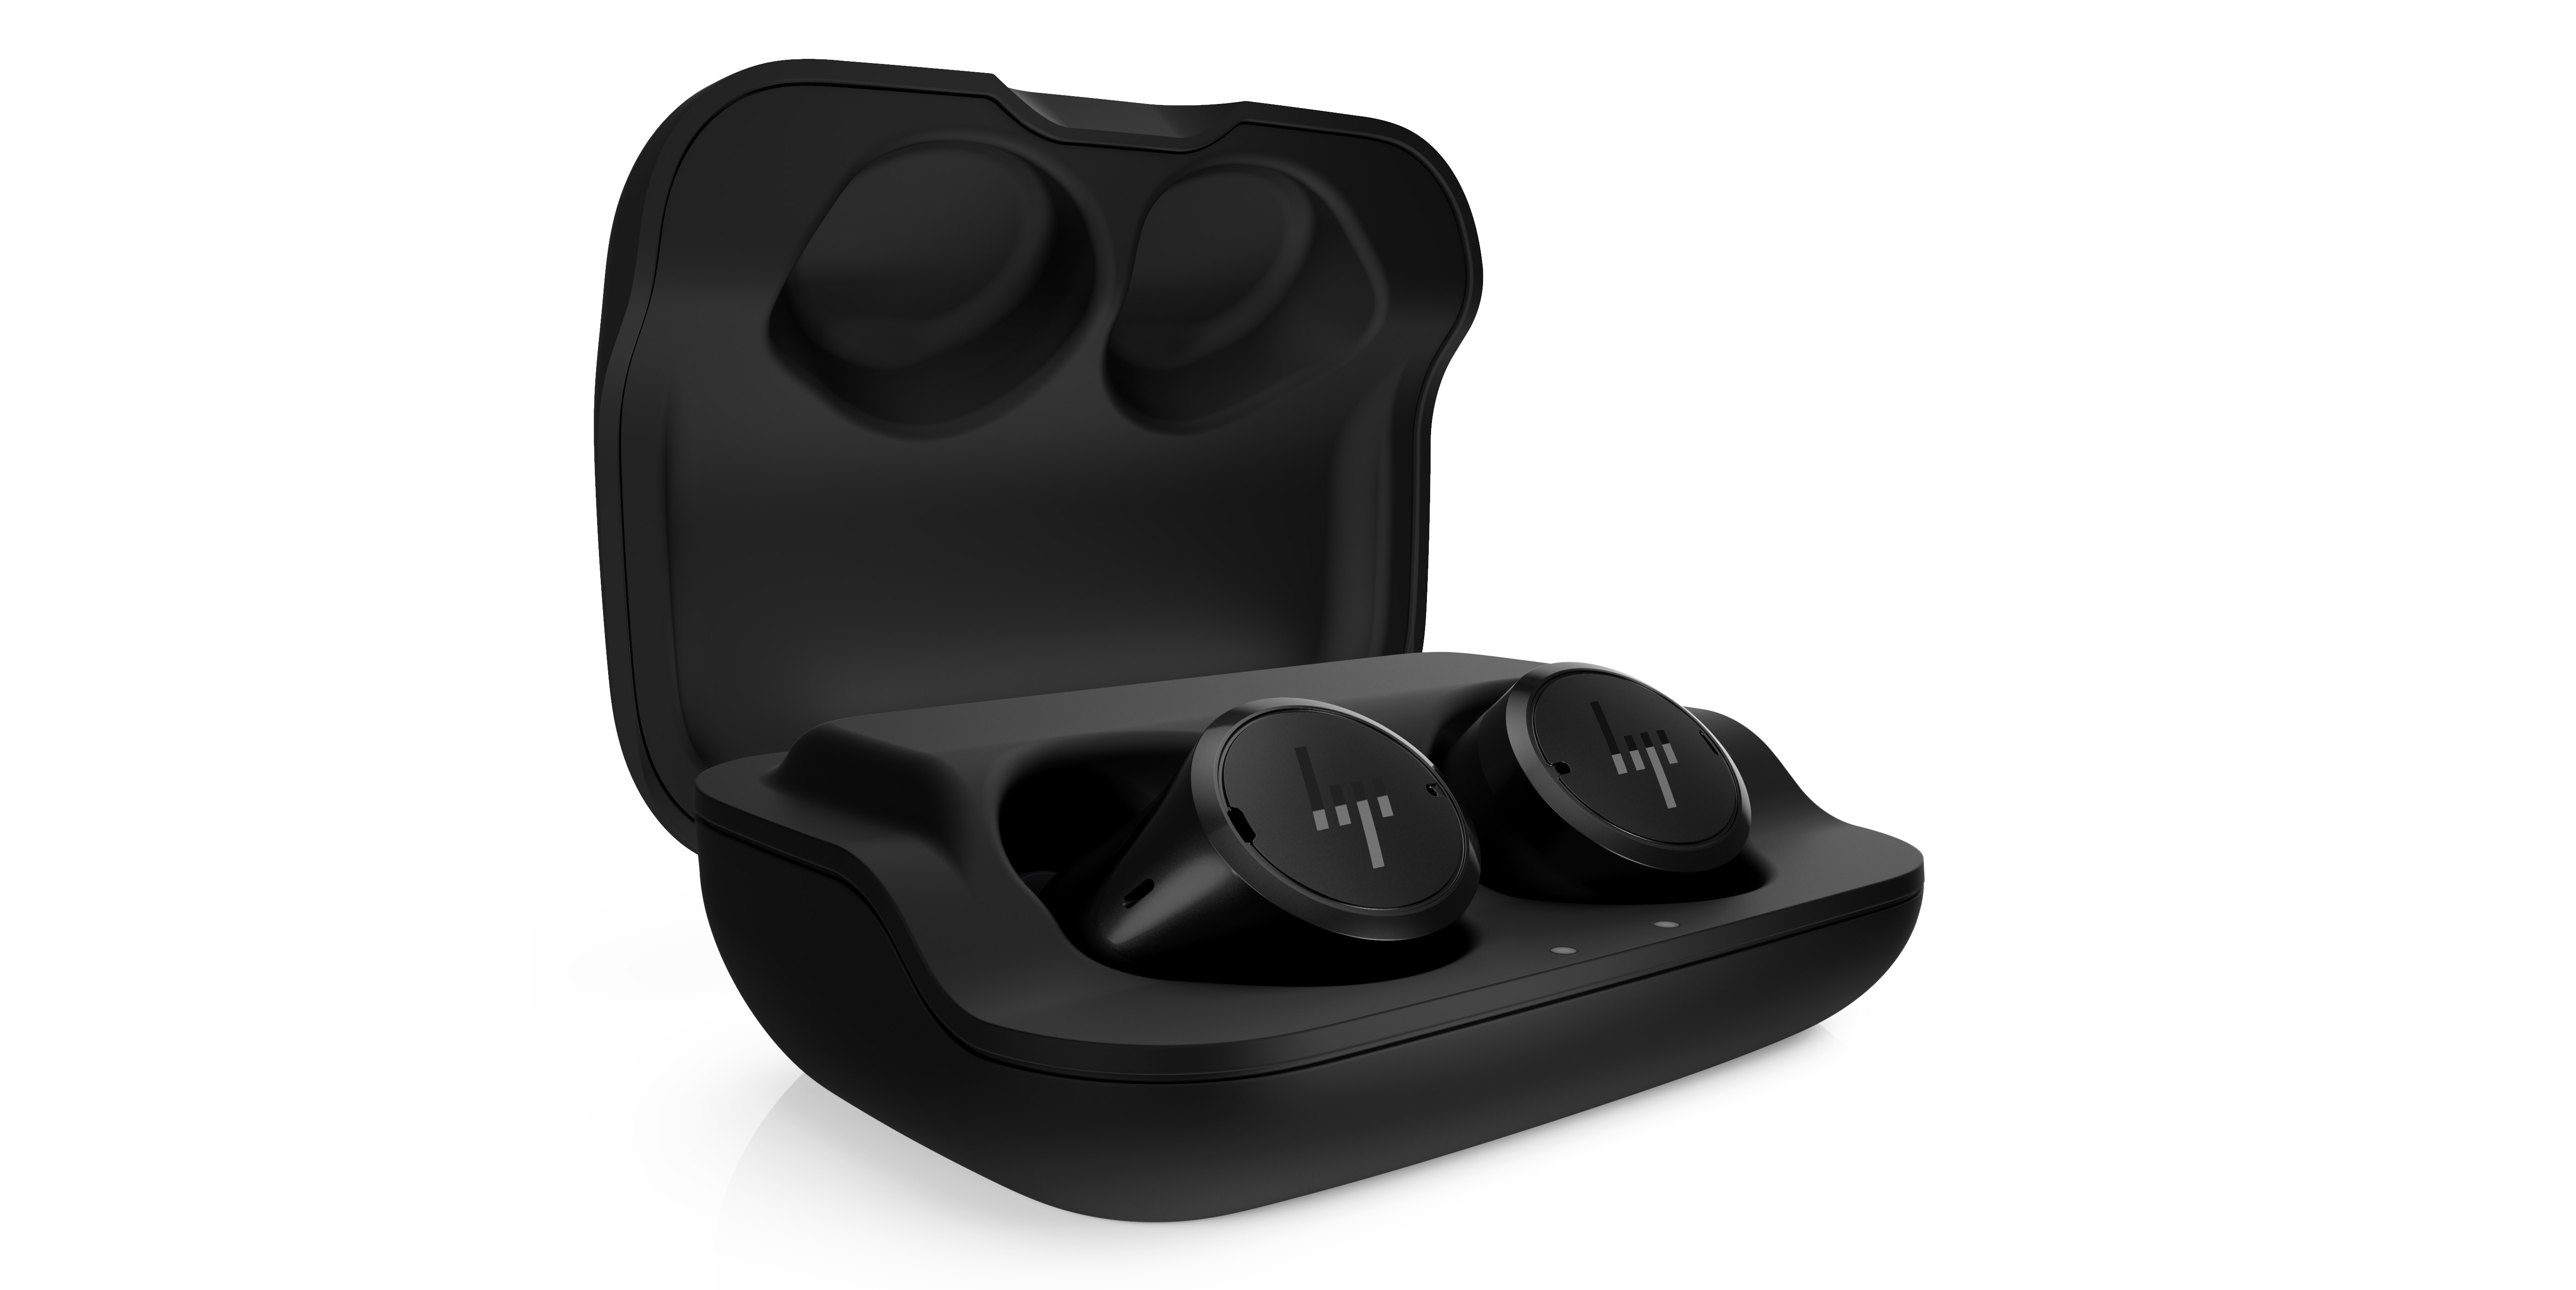 The HP Elite Wireless Earbuds are a new 